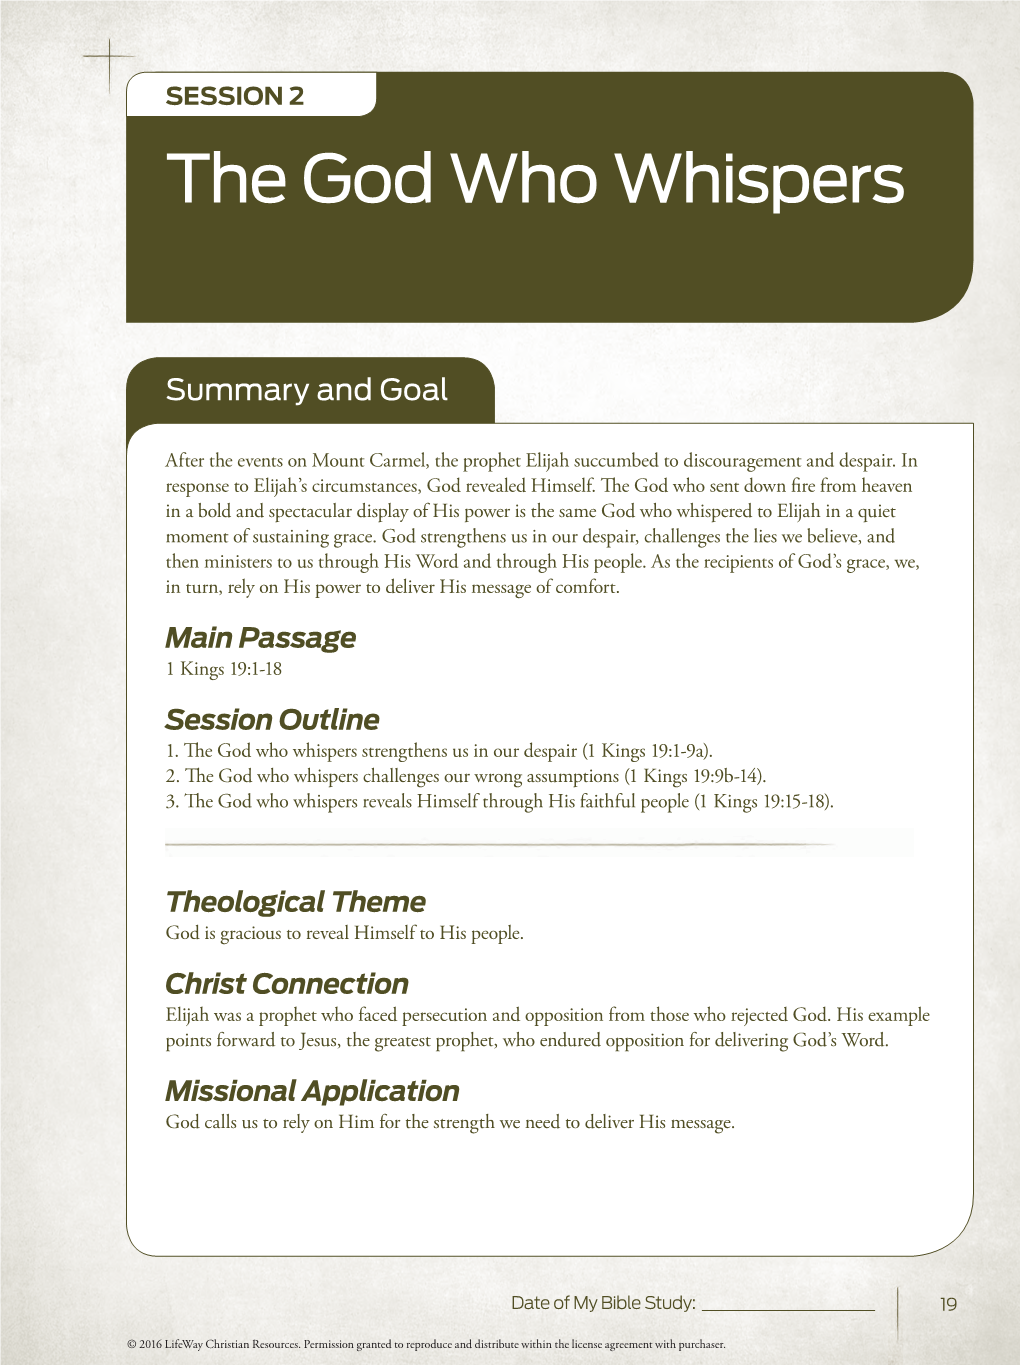 The God Who Whispers